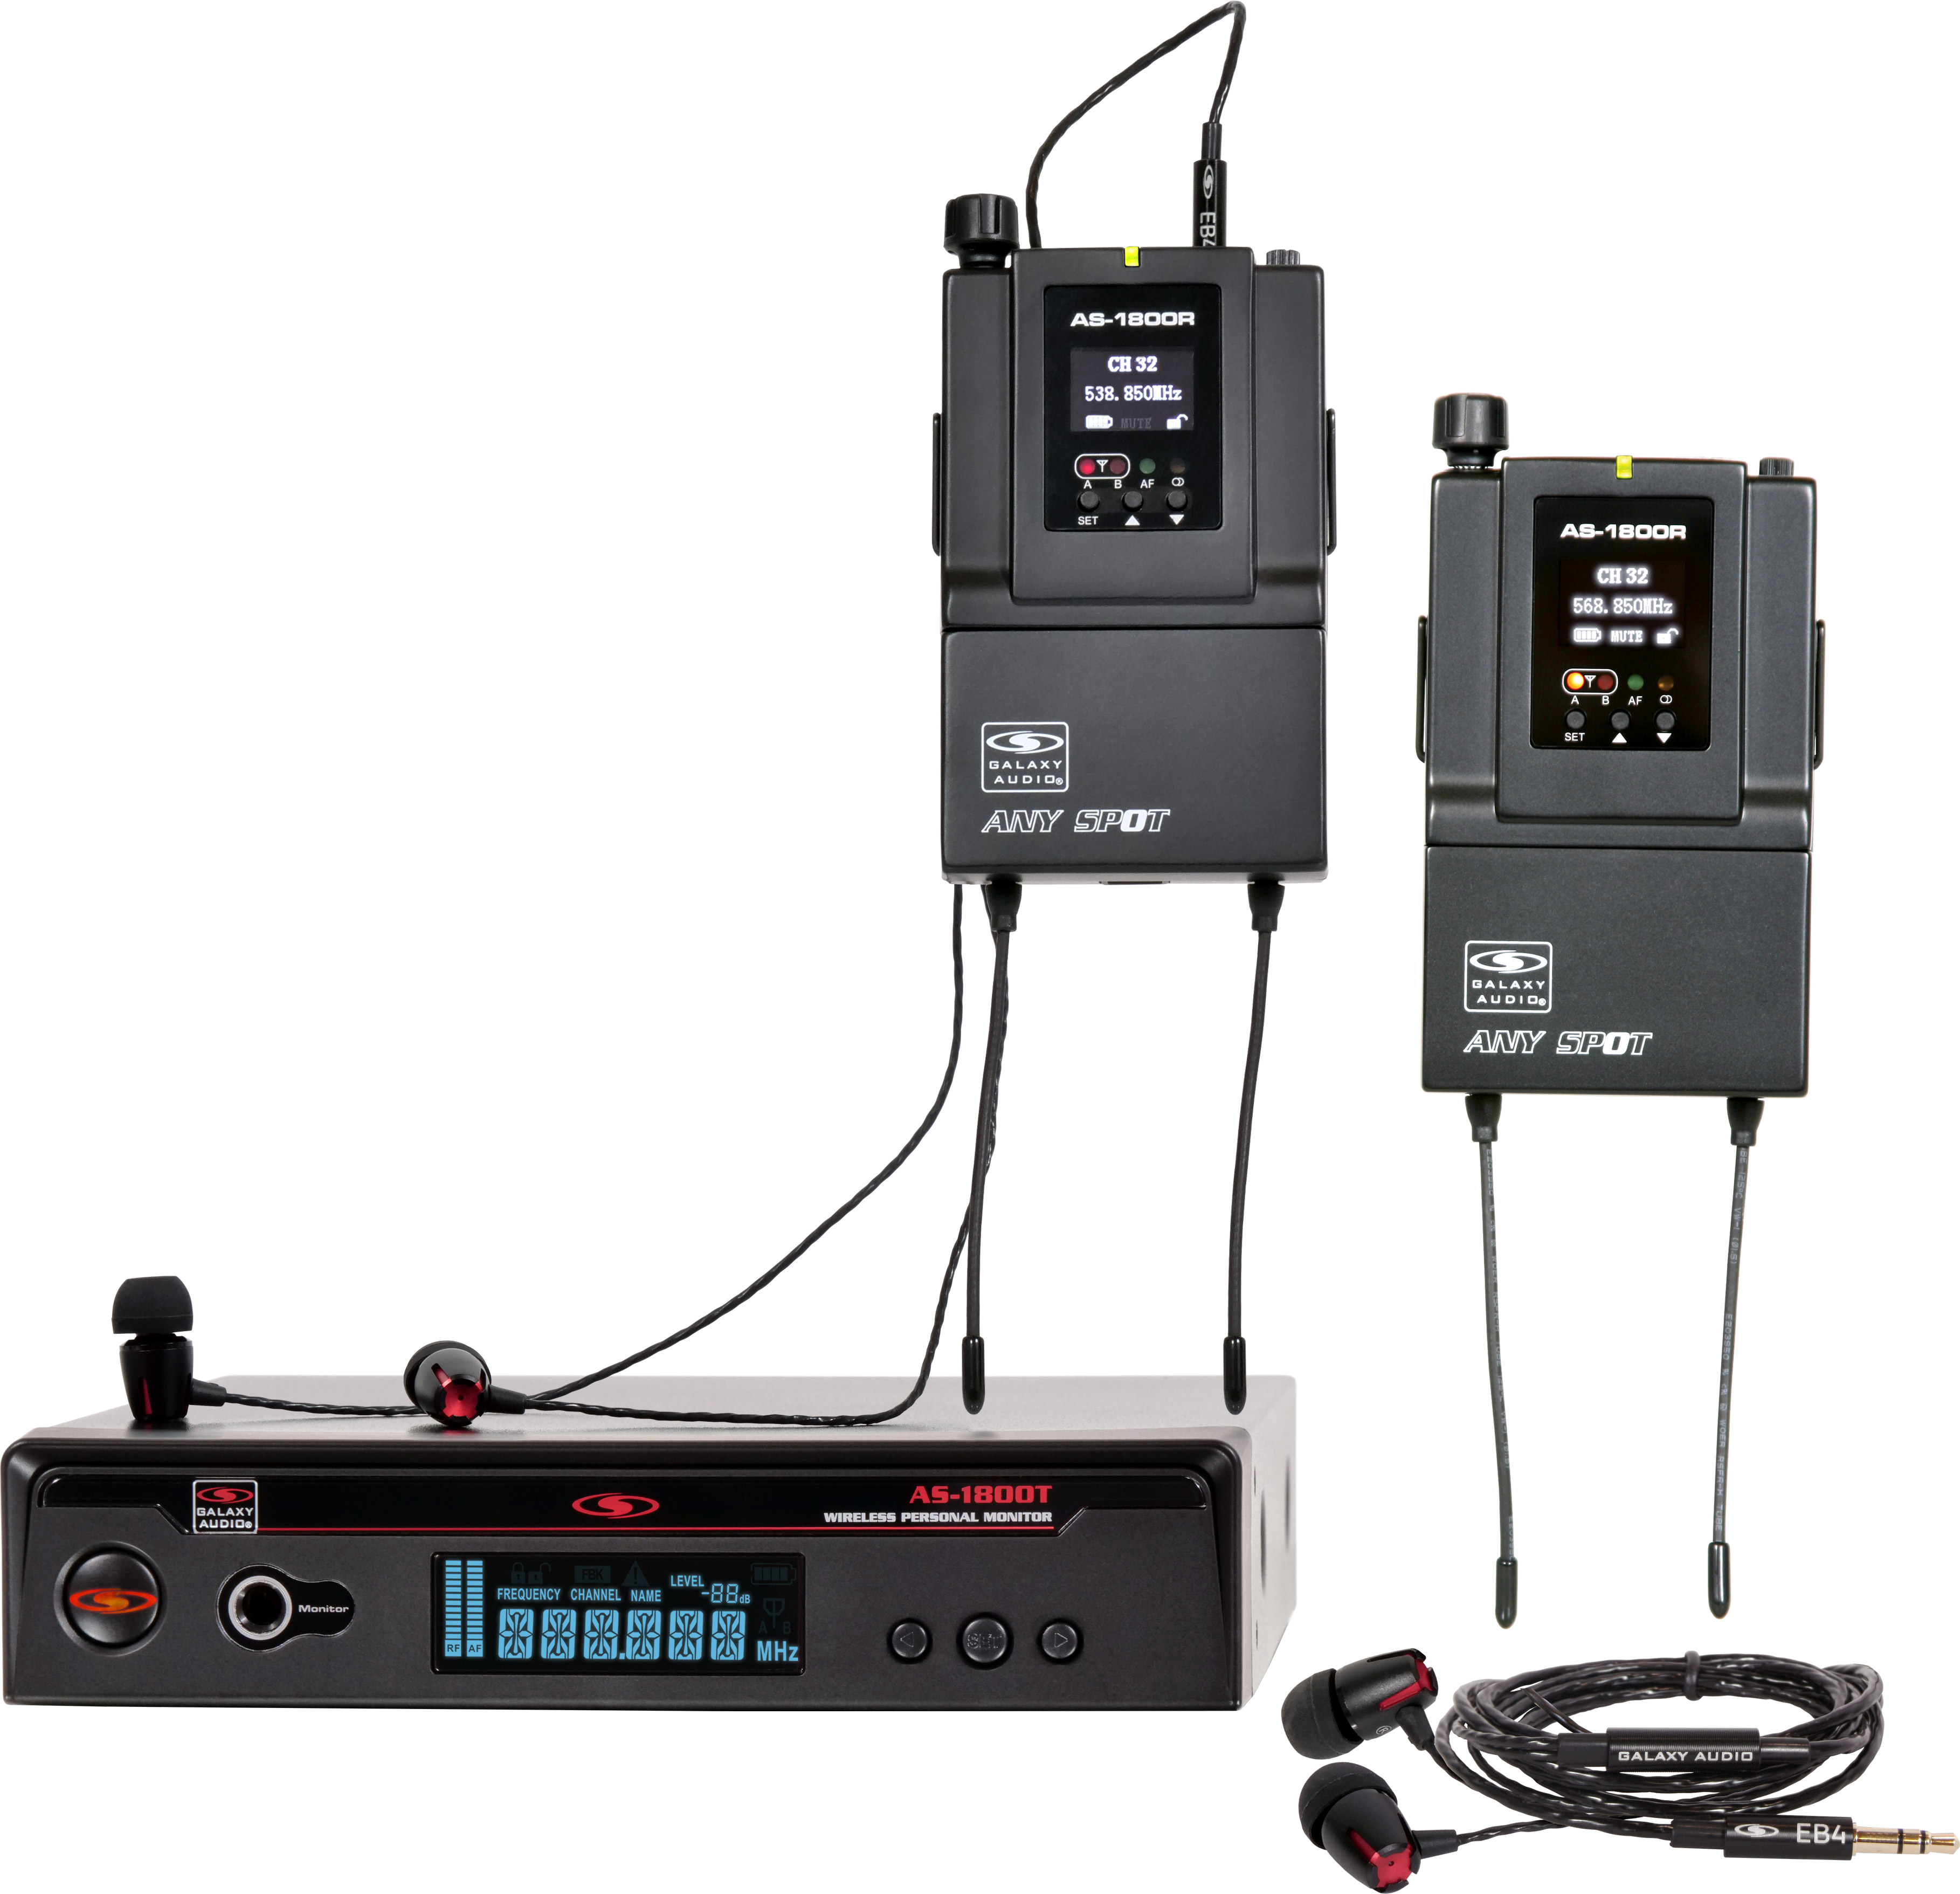 Galaxy Audio AS-1800 | Wireless Personal In-Ear Monitor System